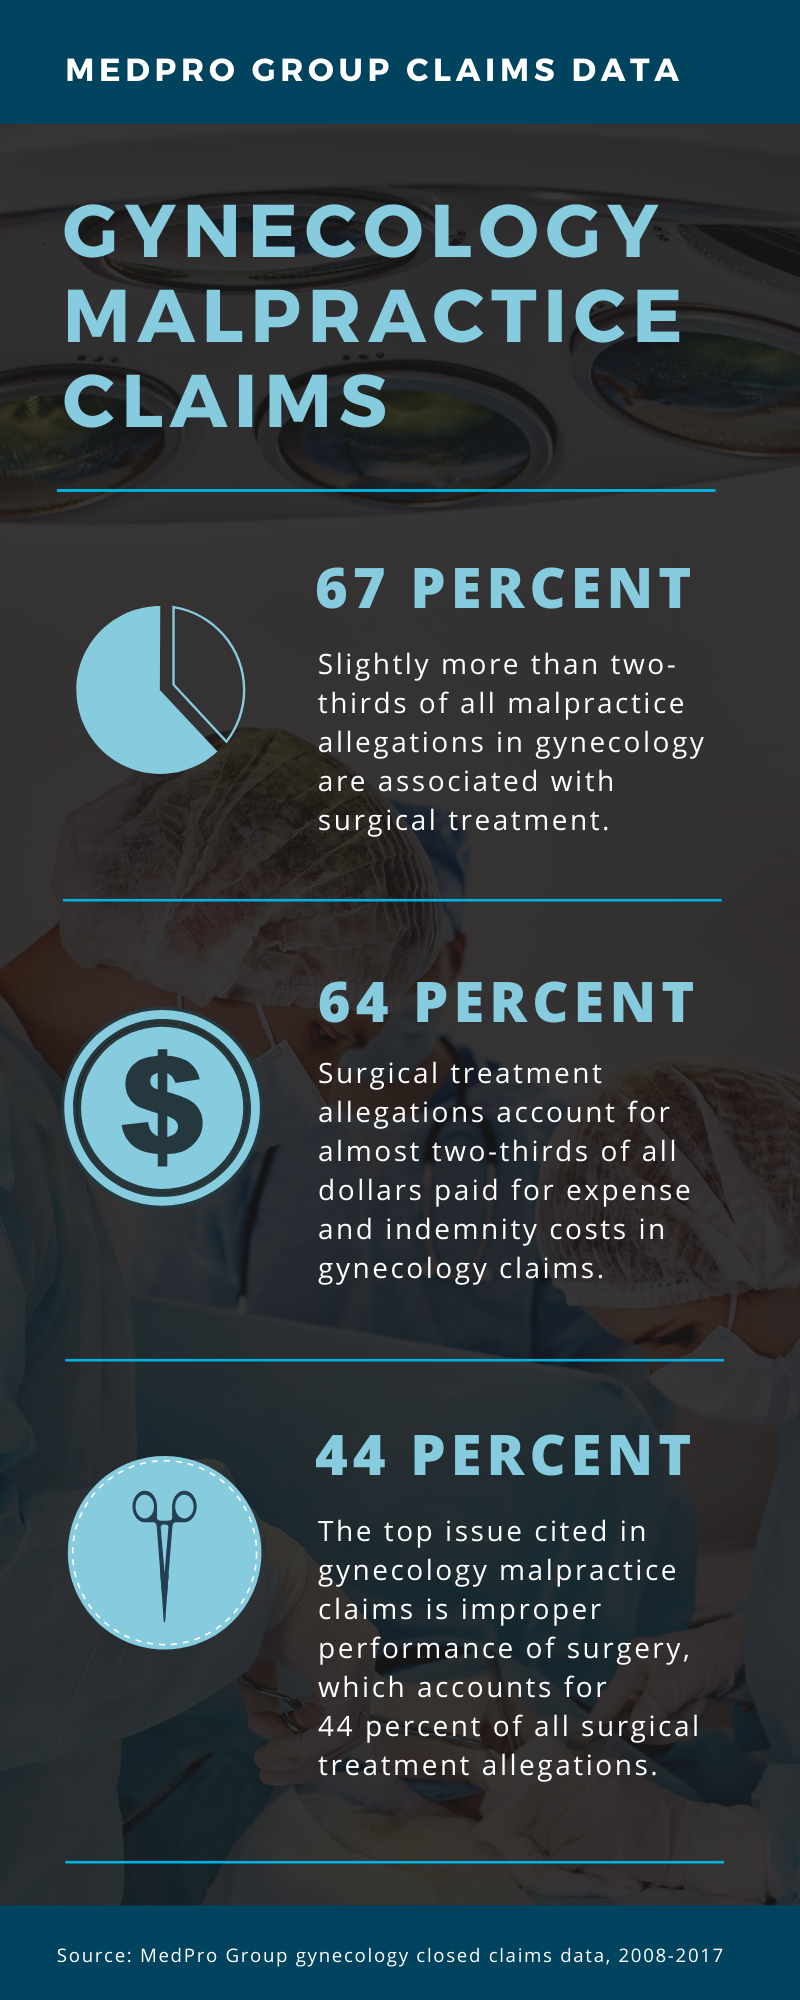 15 Strategies for Tackling the Top Malpractice Allegation in Gynecology